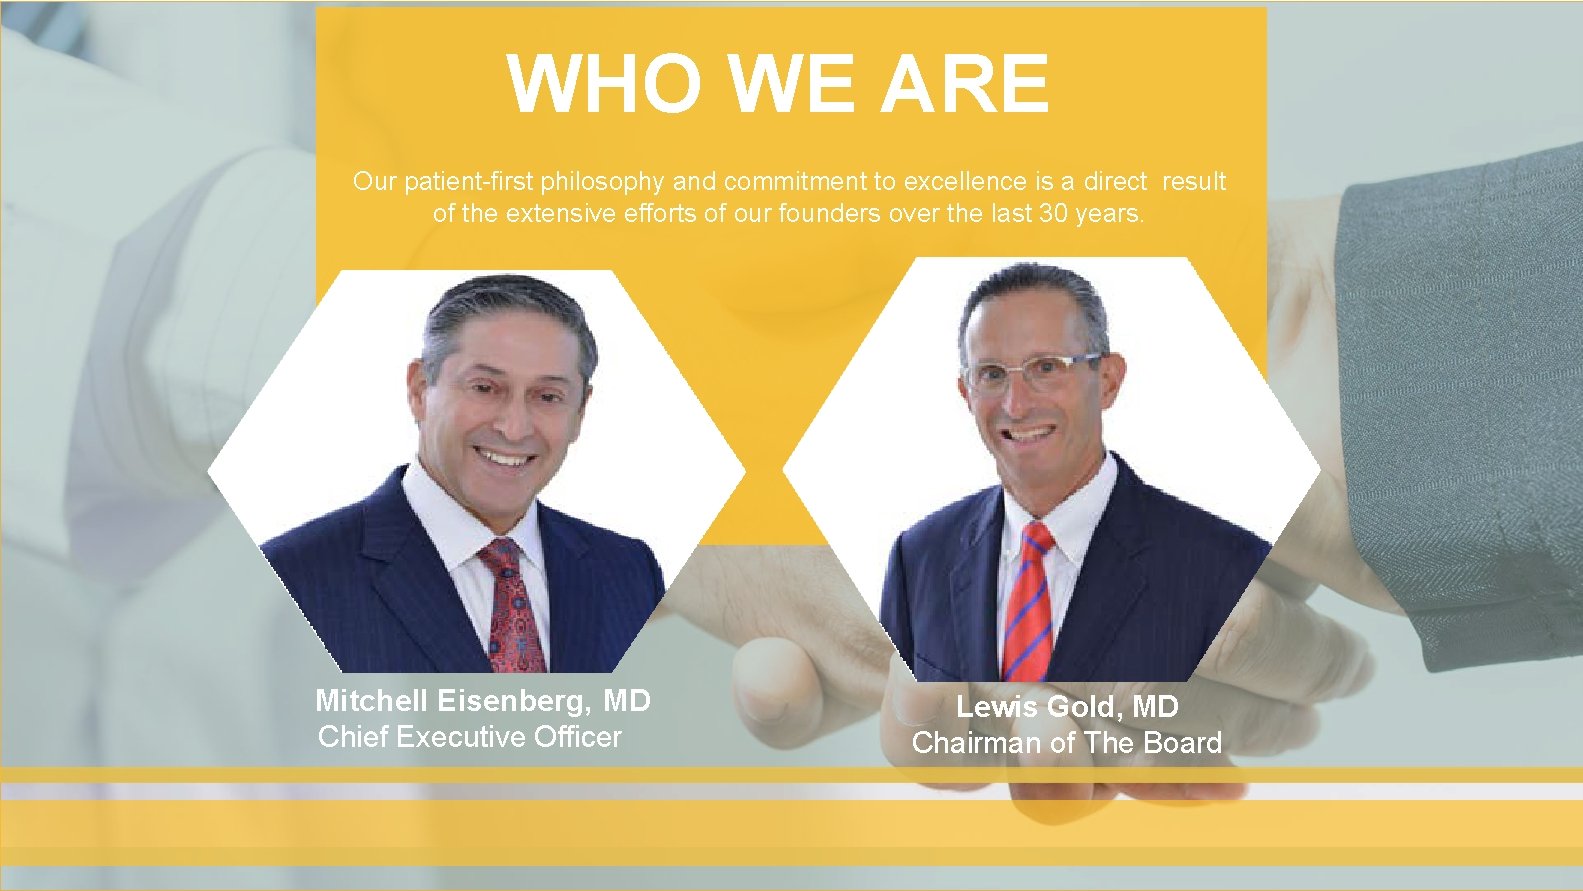 WHO WE ARE Our patient-first philosophy and commitment to excellence is a direct result